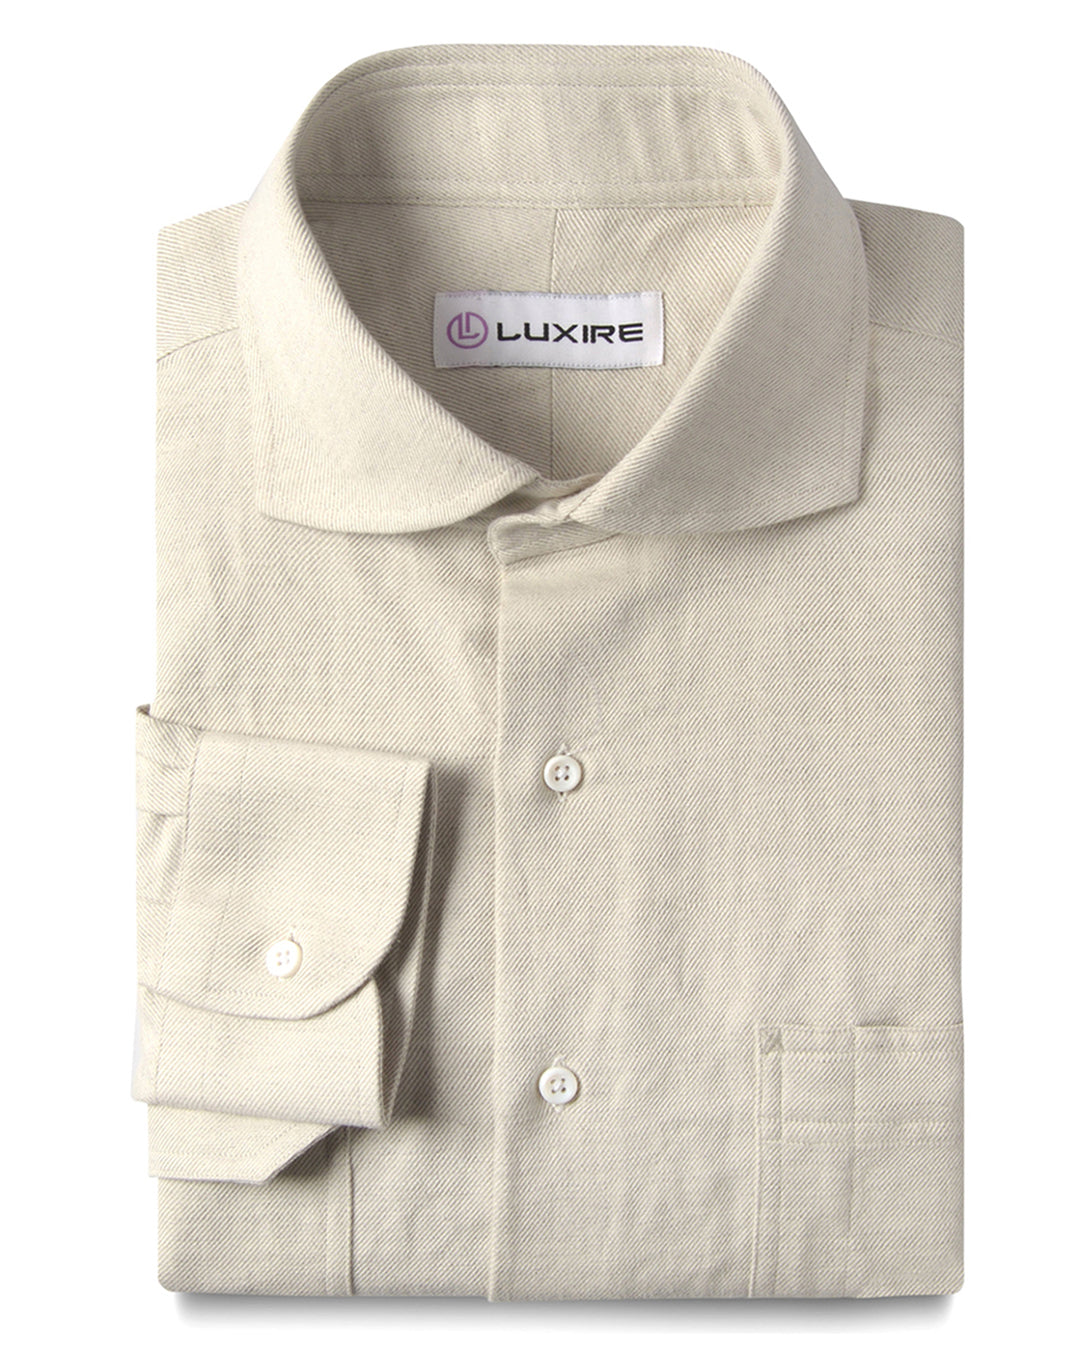 Front of the custom linen shirt for men in cream twill by Luxire Clothing